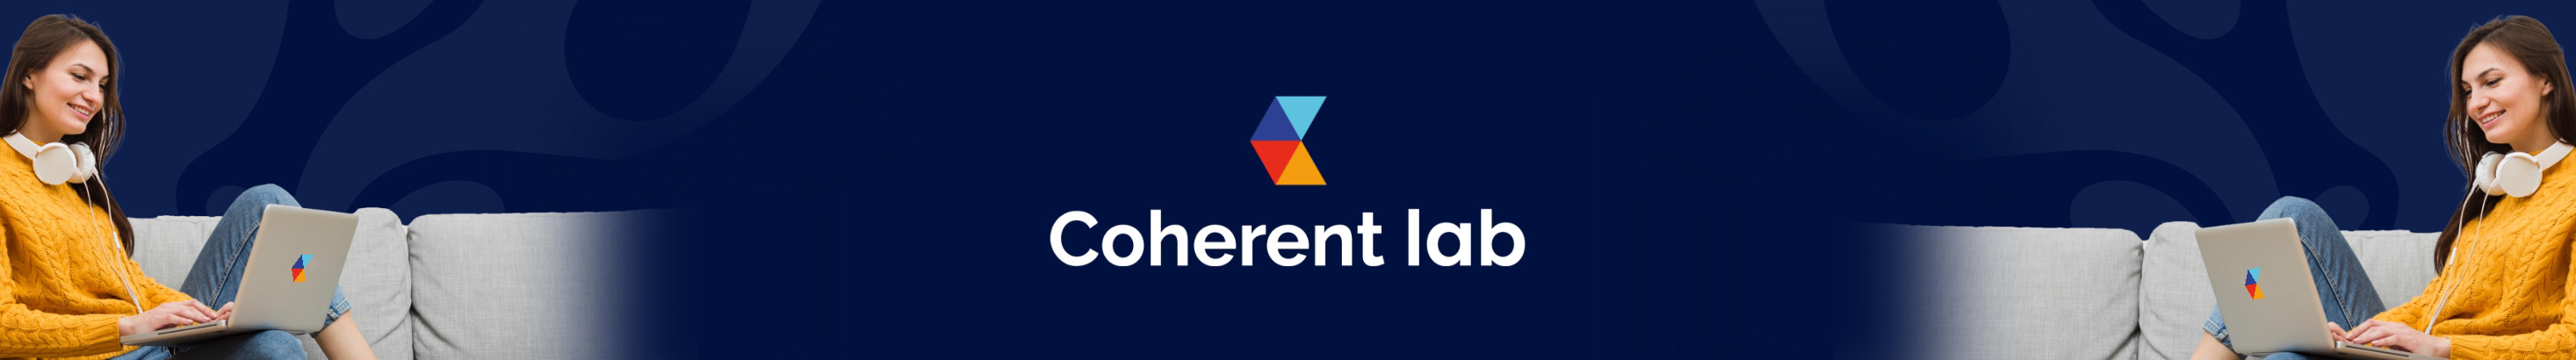 Coherent Lab LLP's profile banner